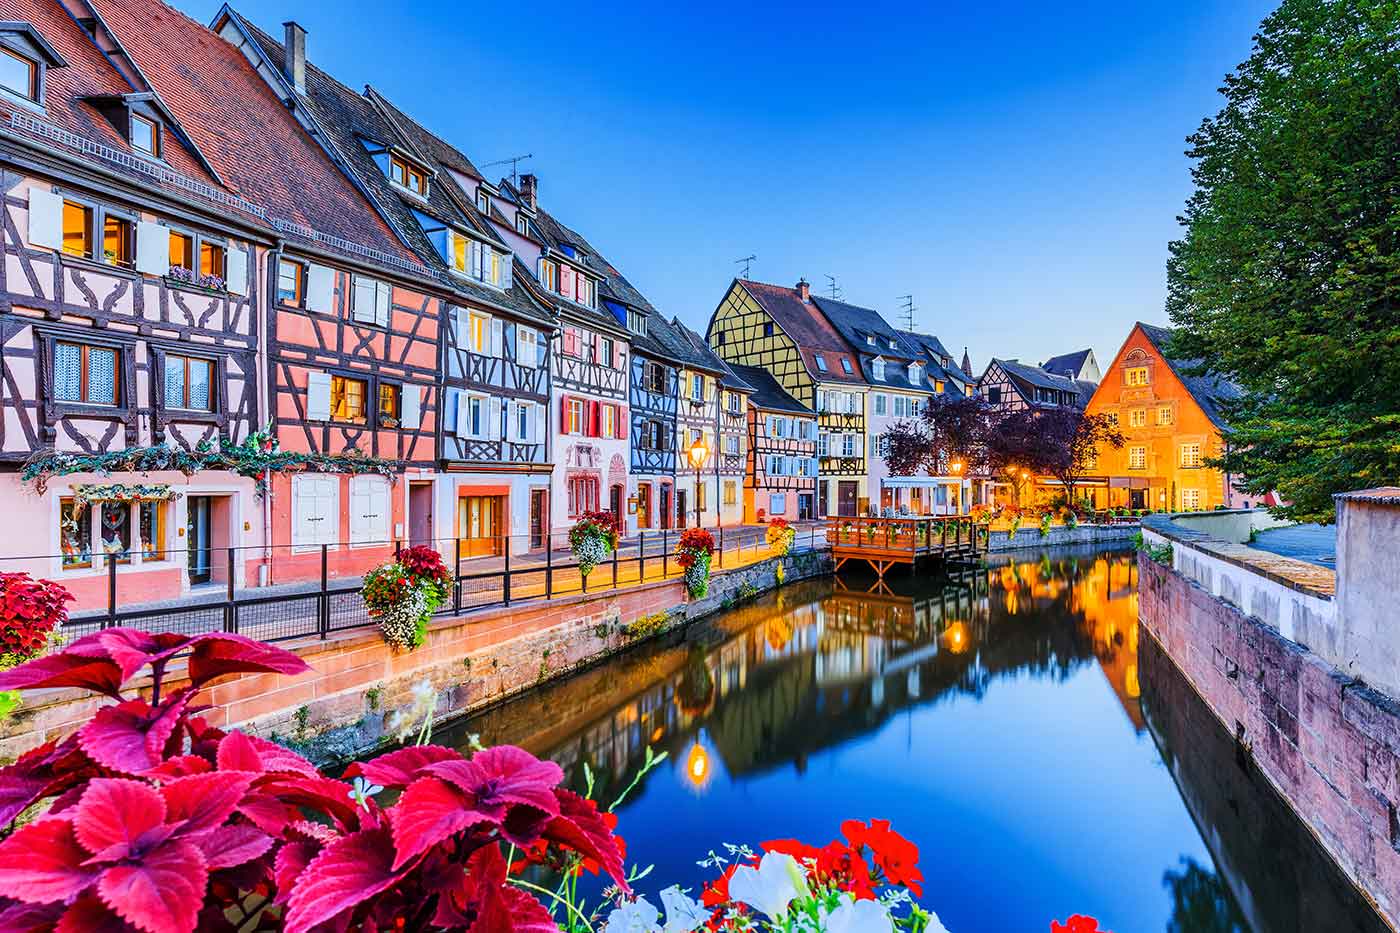 16 Things to Do in Strasbourg, France - Top Attractions of Strasbourg